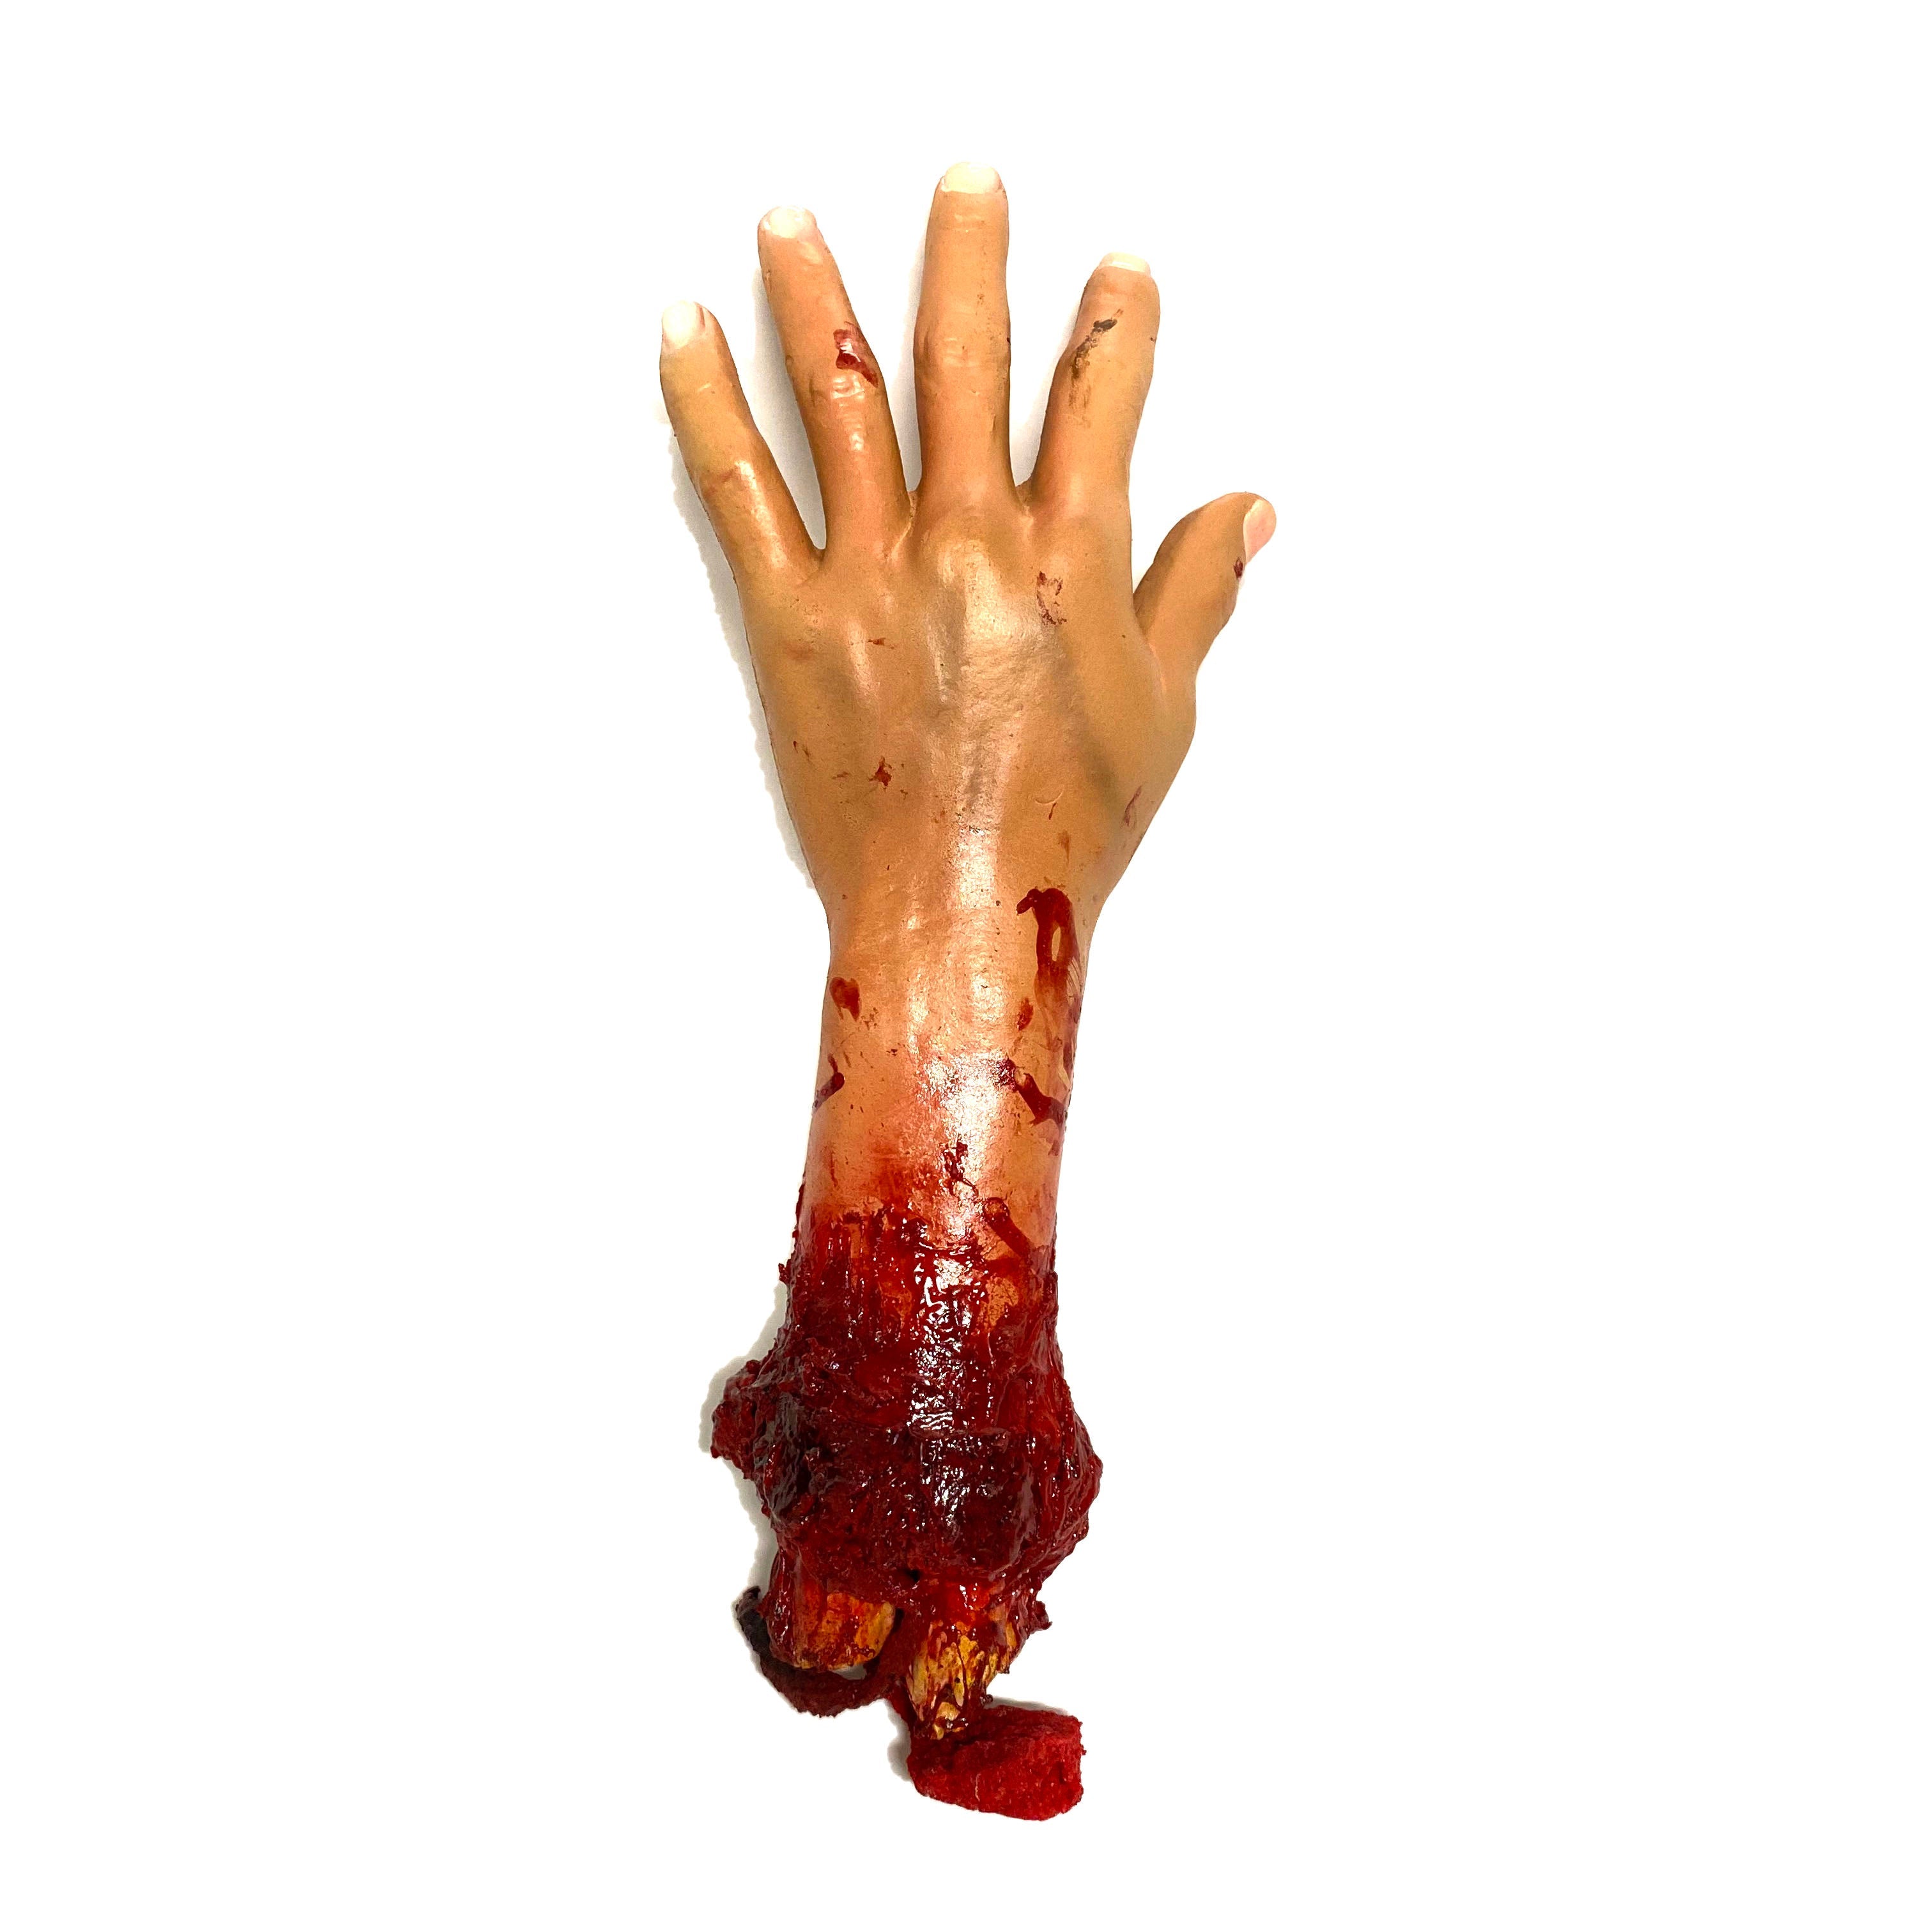 Severed Hand and Wrist - Foam Rubber with Gore Effects - Left - Left Hand